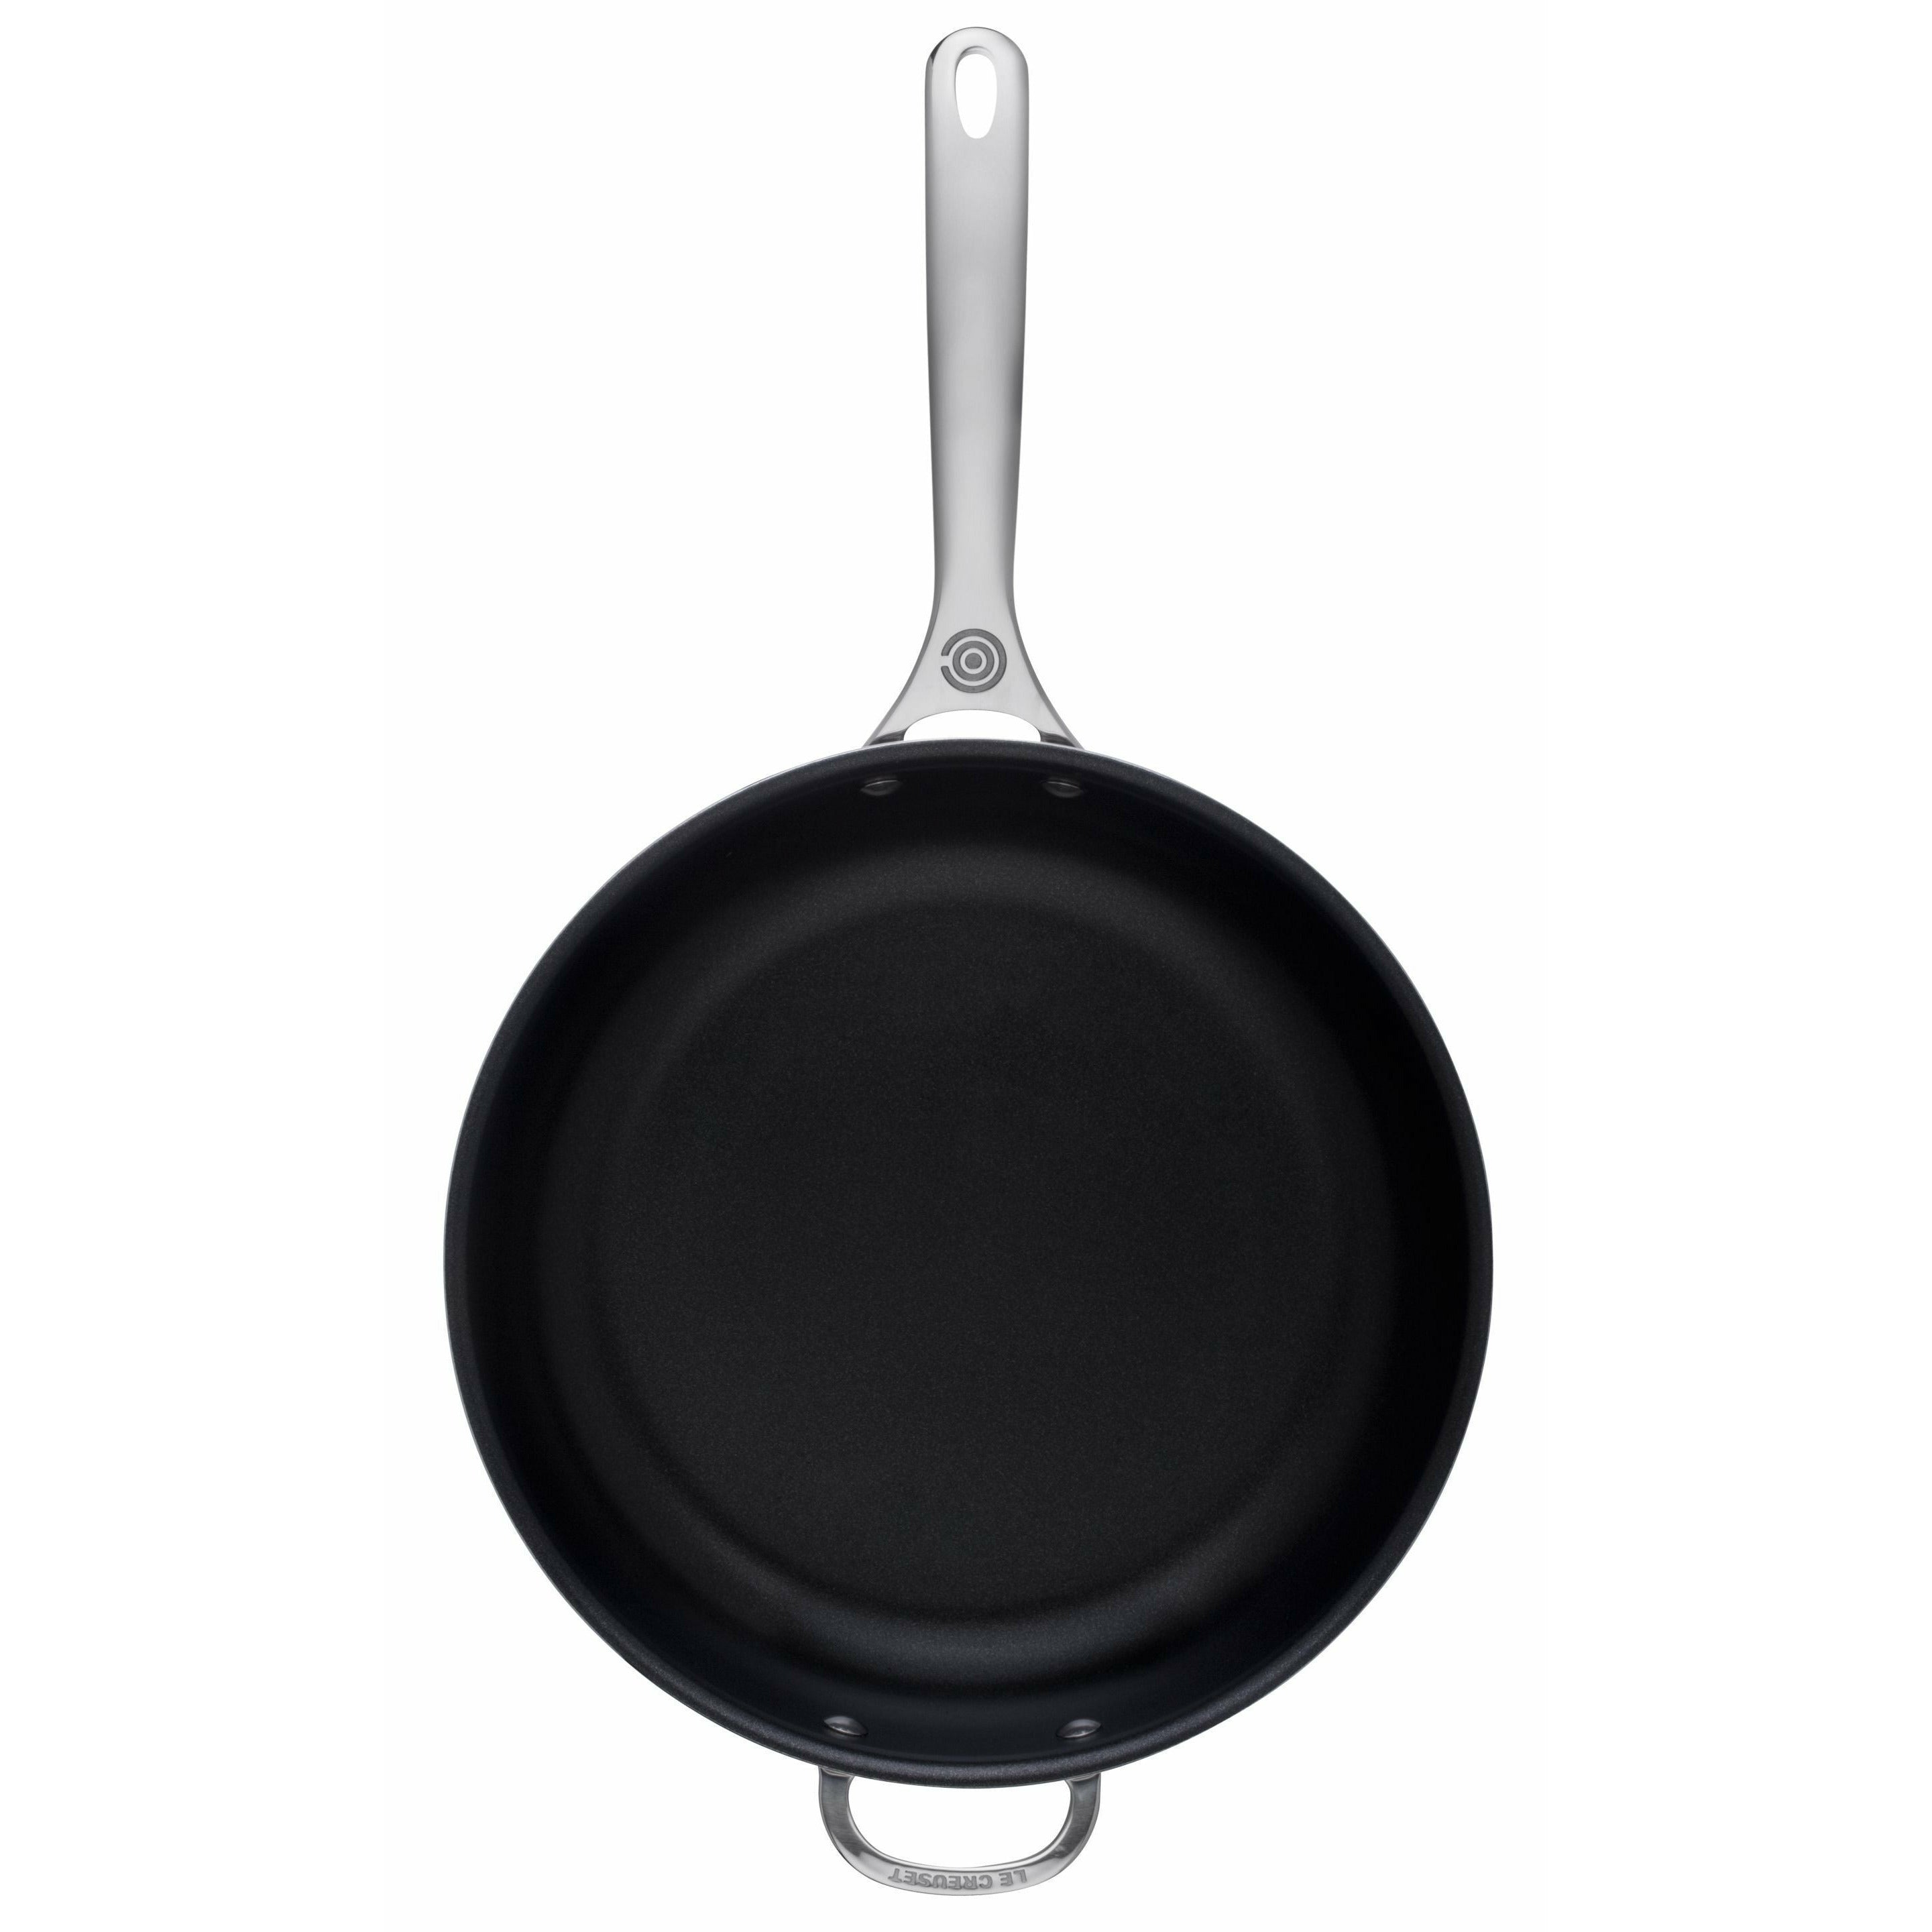 Le Creuset Signature Stainless Steel Non Stick Deep Frying Pan 28 Cm With Helper Handle